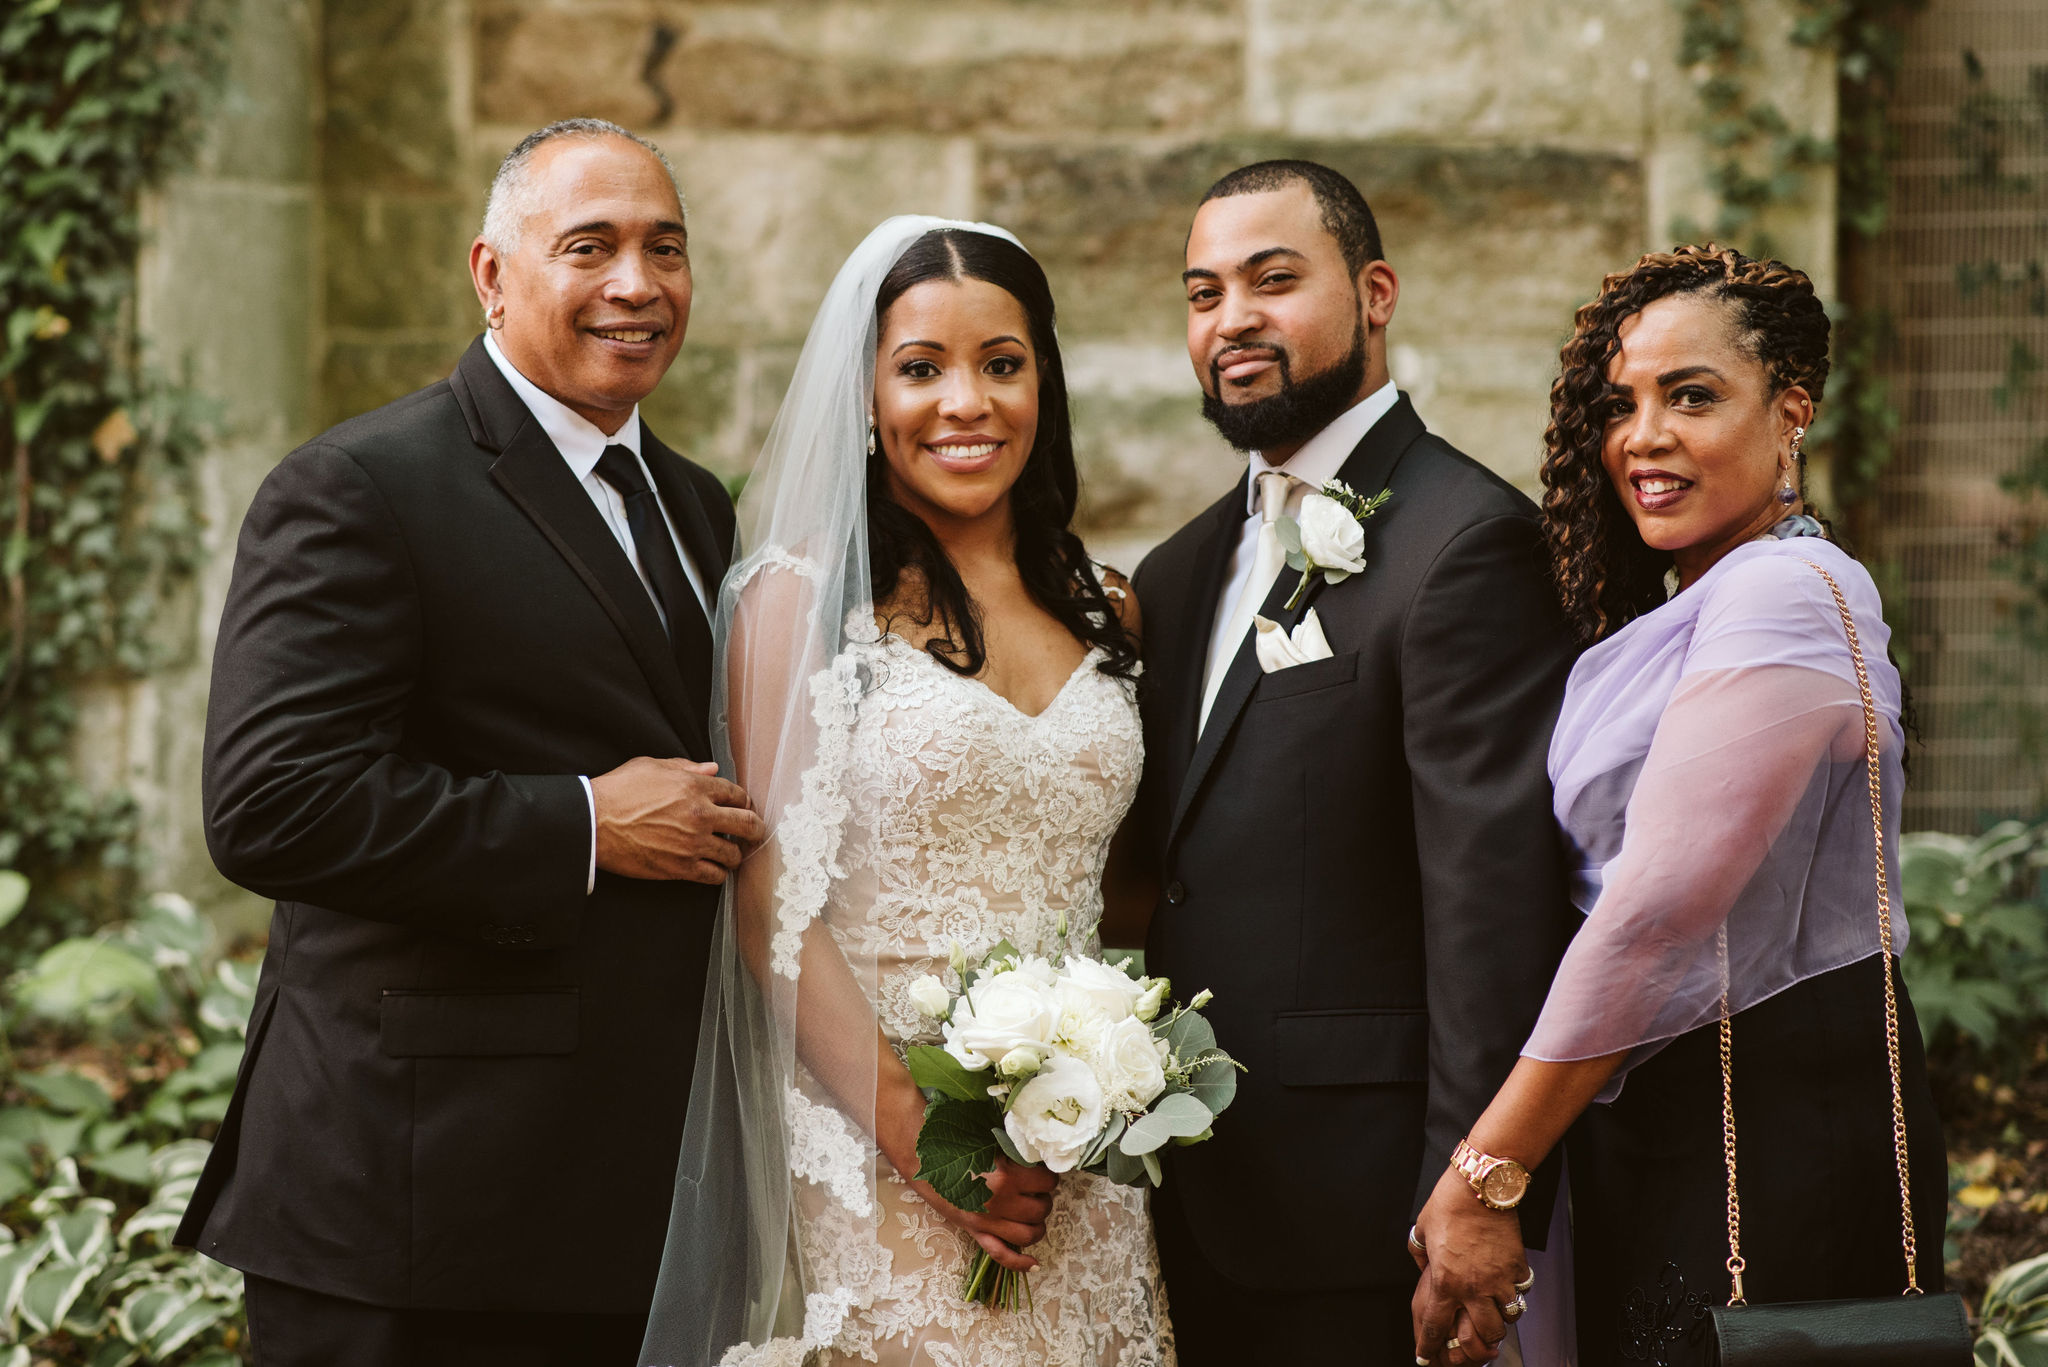  Baltimore, Maryland Wedding Photographer, Mount Vernon, Chase Court, Classic, Outdoor Ceremony, Garden, Romantic, Portrait of Bride and Groom with Groom’s Parents, Mother of the Groom, Father of the Groom 